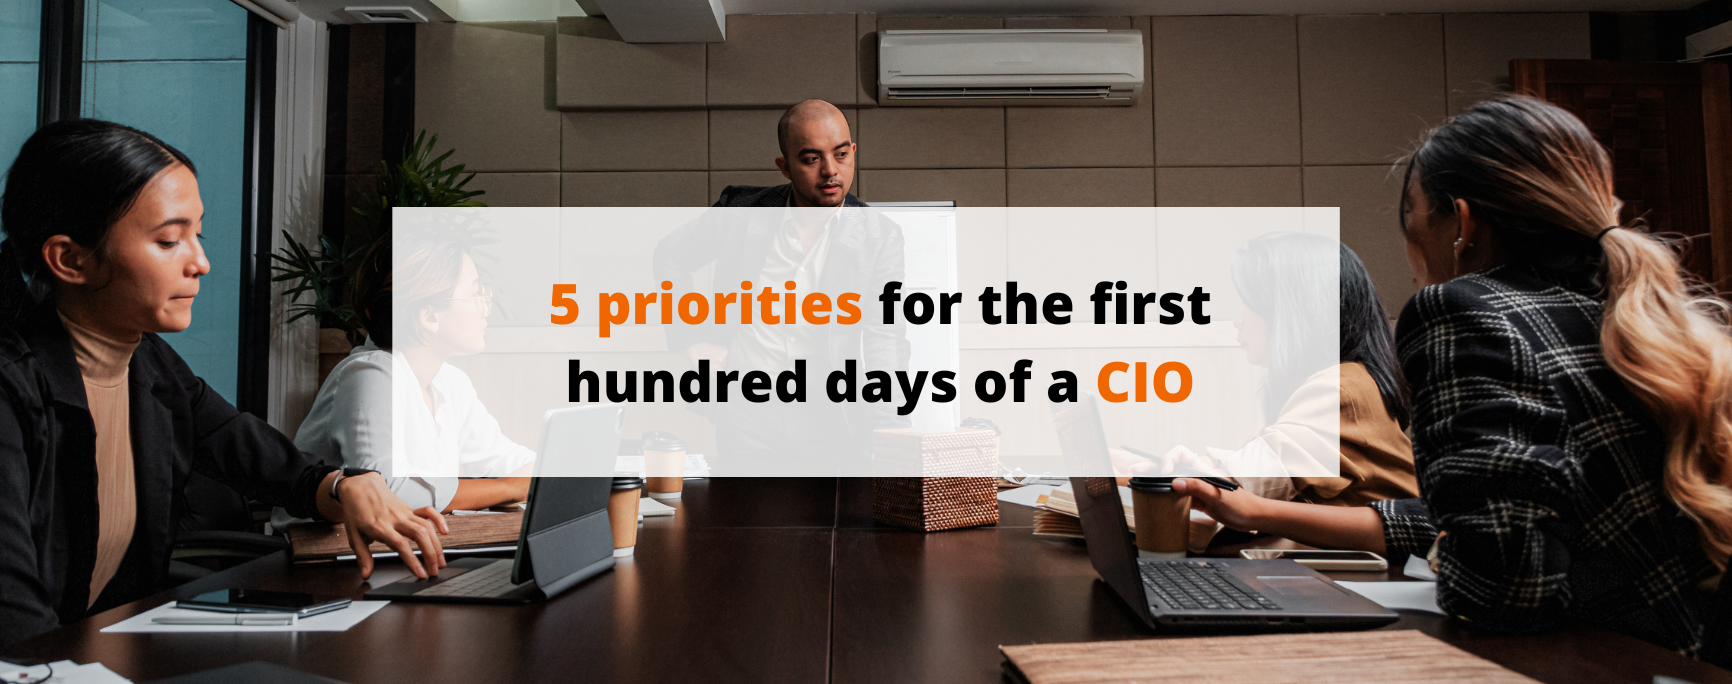 5 priorities for the first hundred days of a CIO